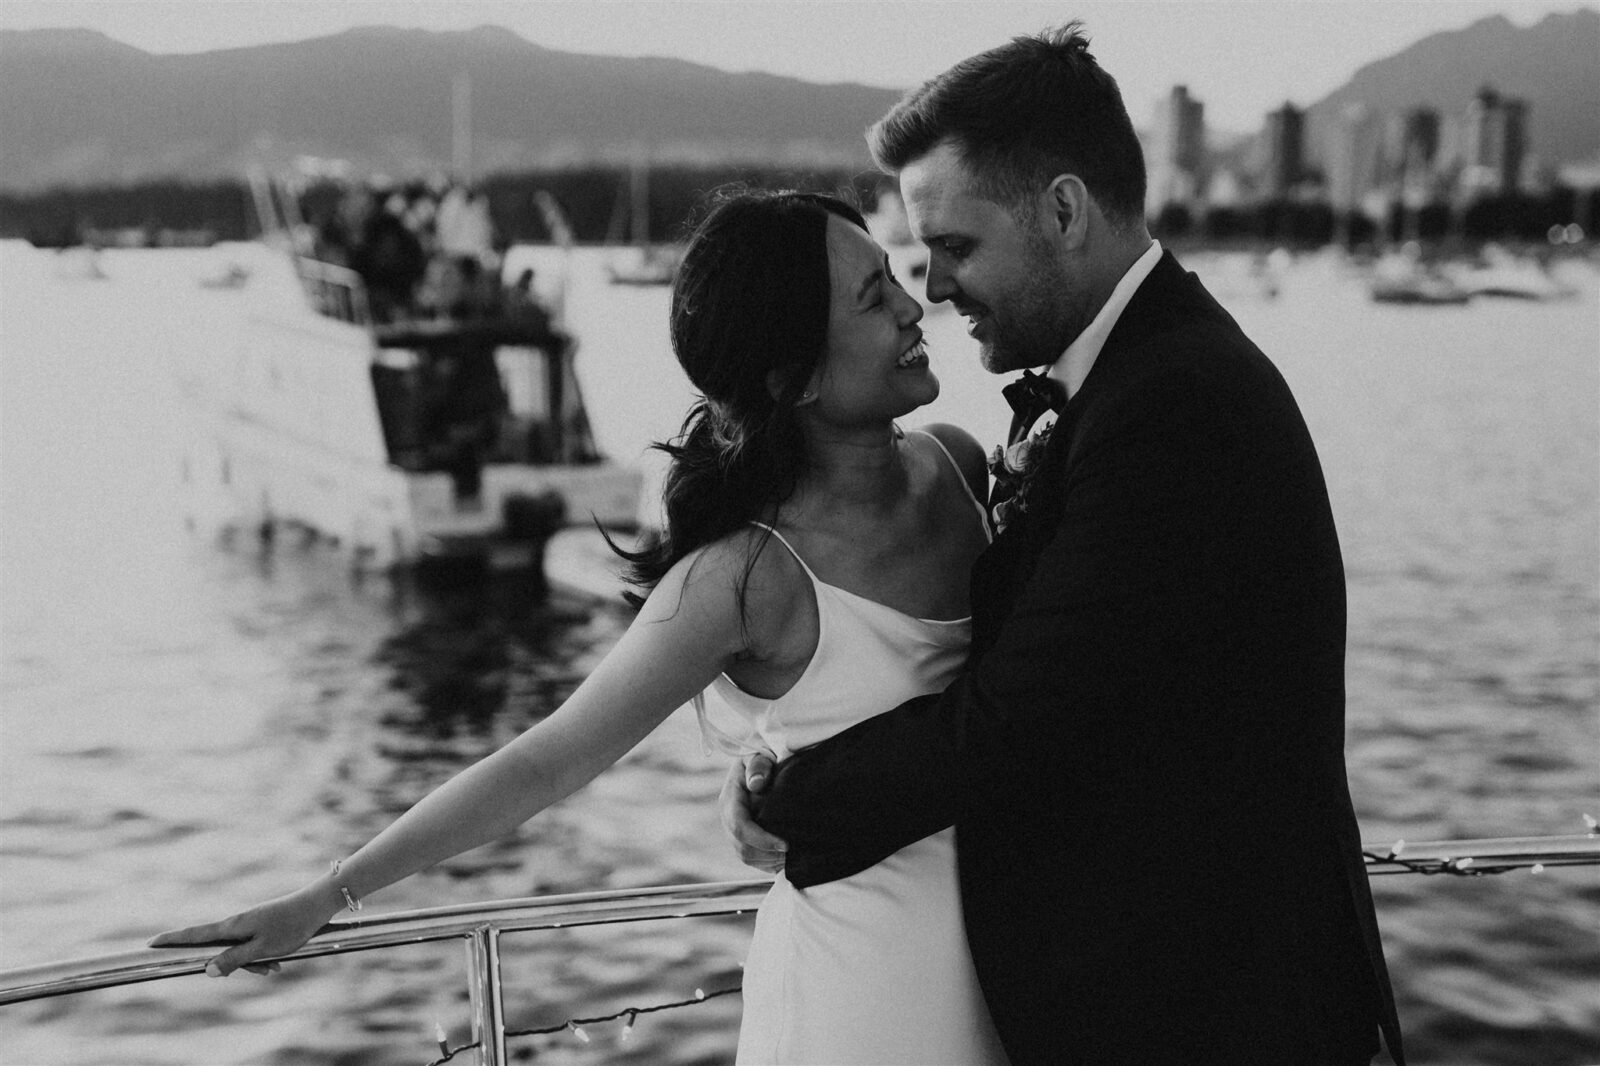 Bride and groom embrace on boat during Vancouver's Festival of Lights.